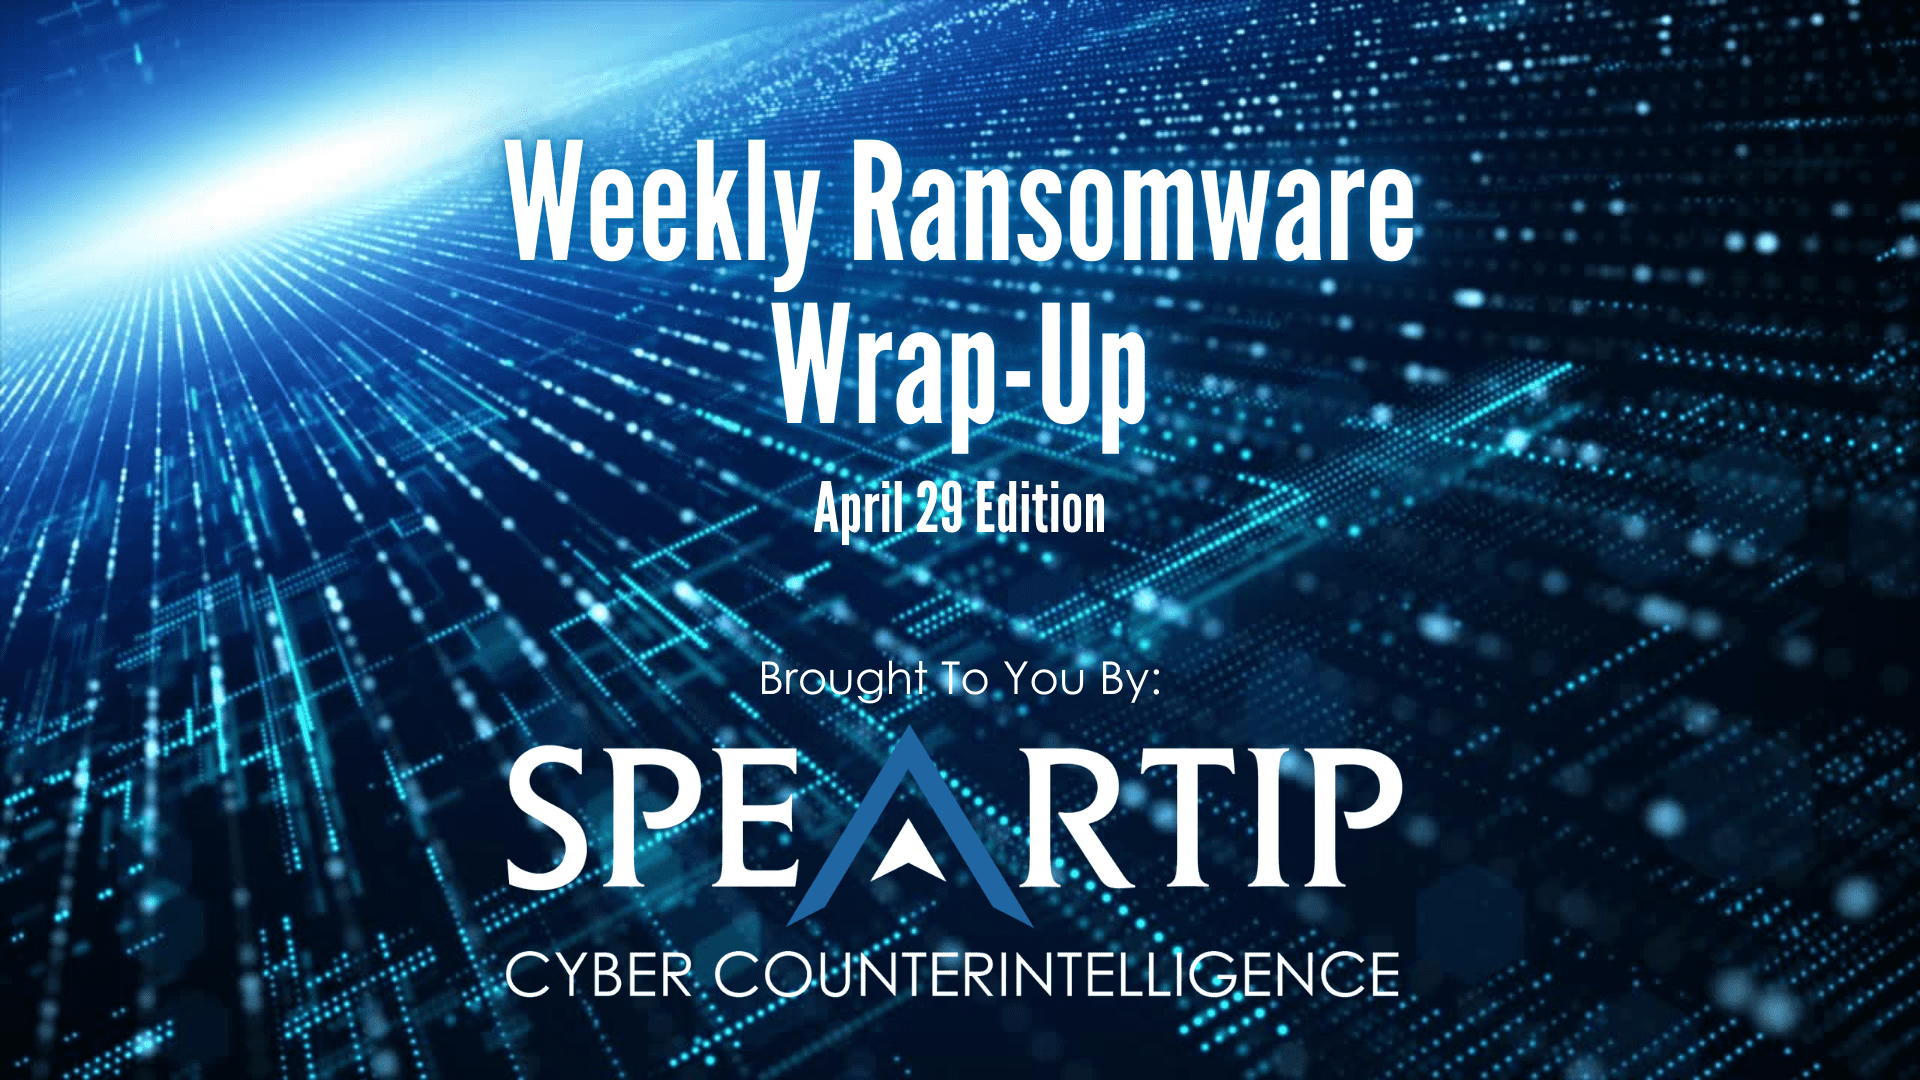 April 29_Weekly Ransomware Wrap-Up